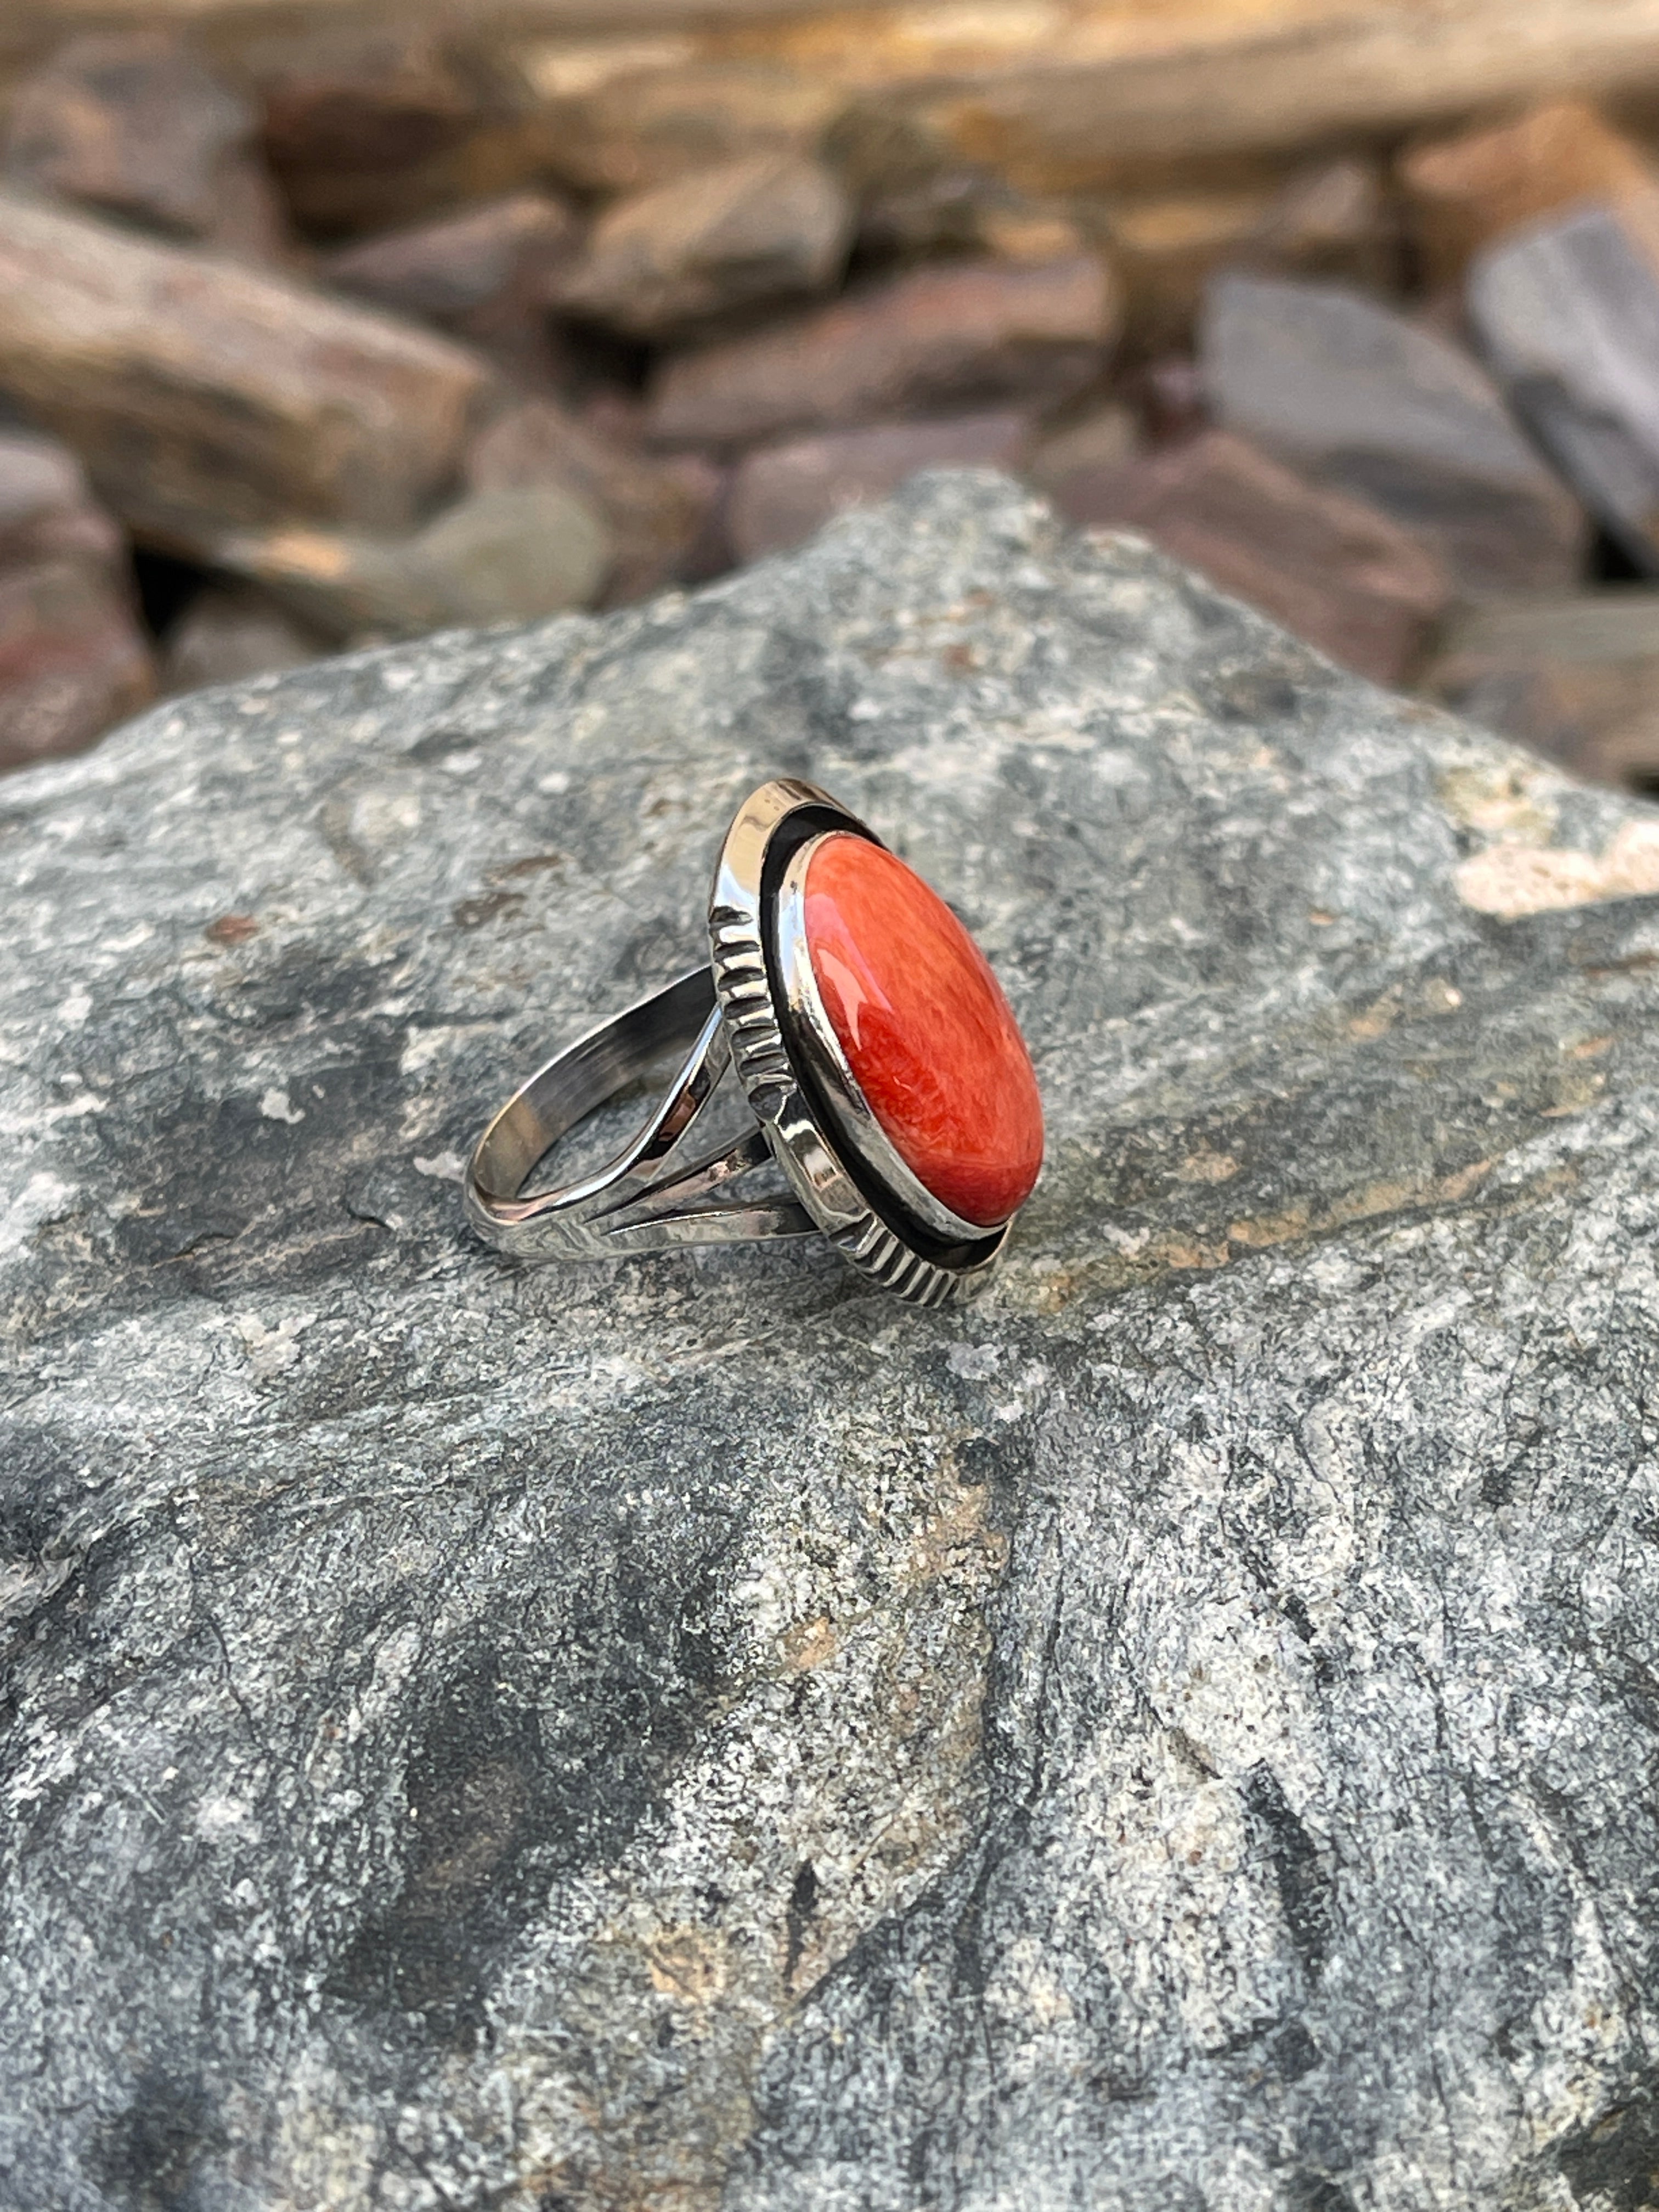 Signature Handmade Solid Sterling Silver Orange Spiny Oyster Ring with Shadow Box Trim - Size 6 1/2